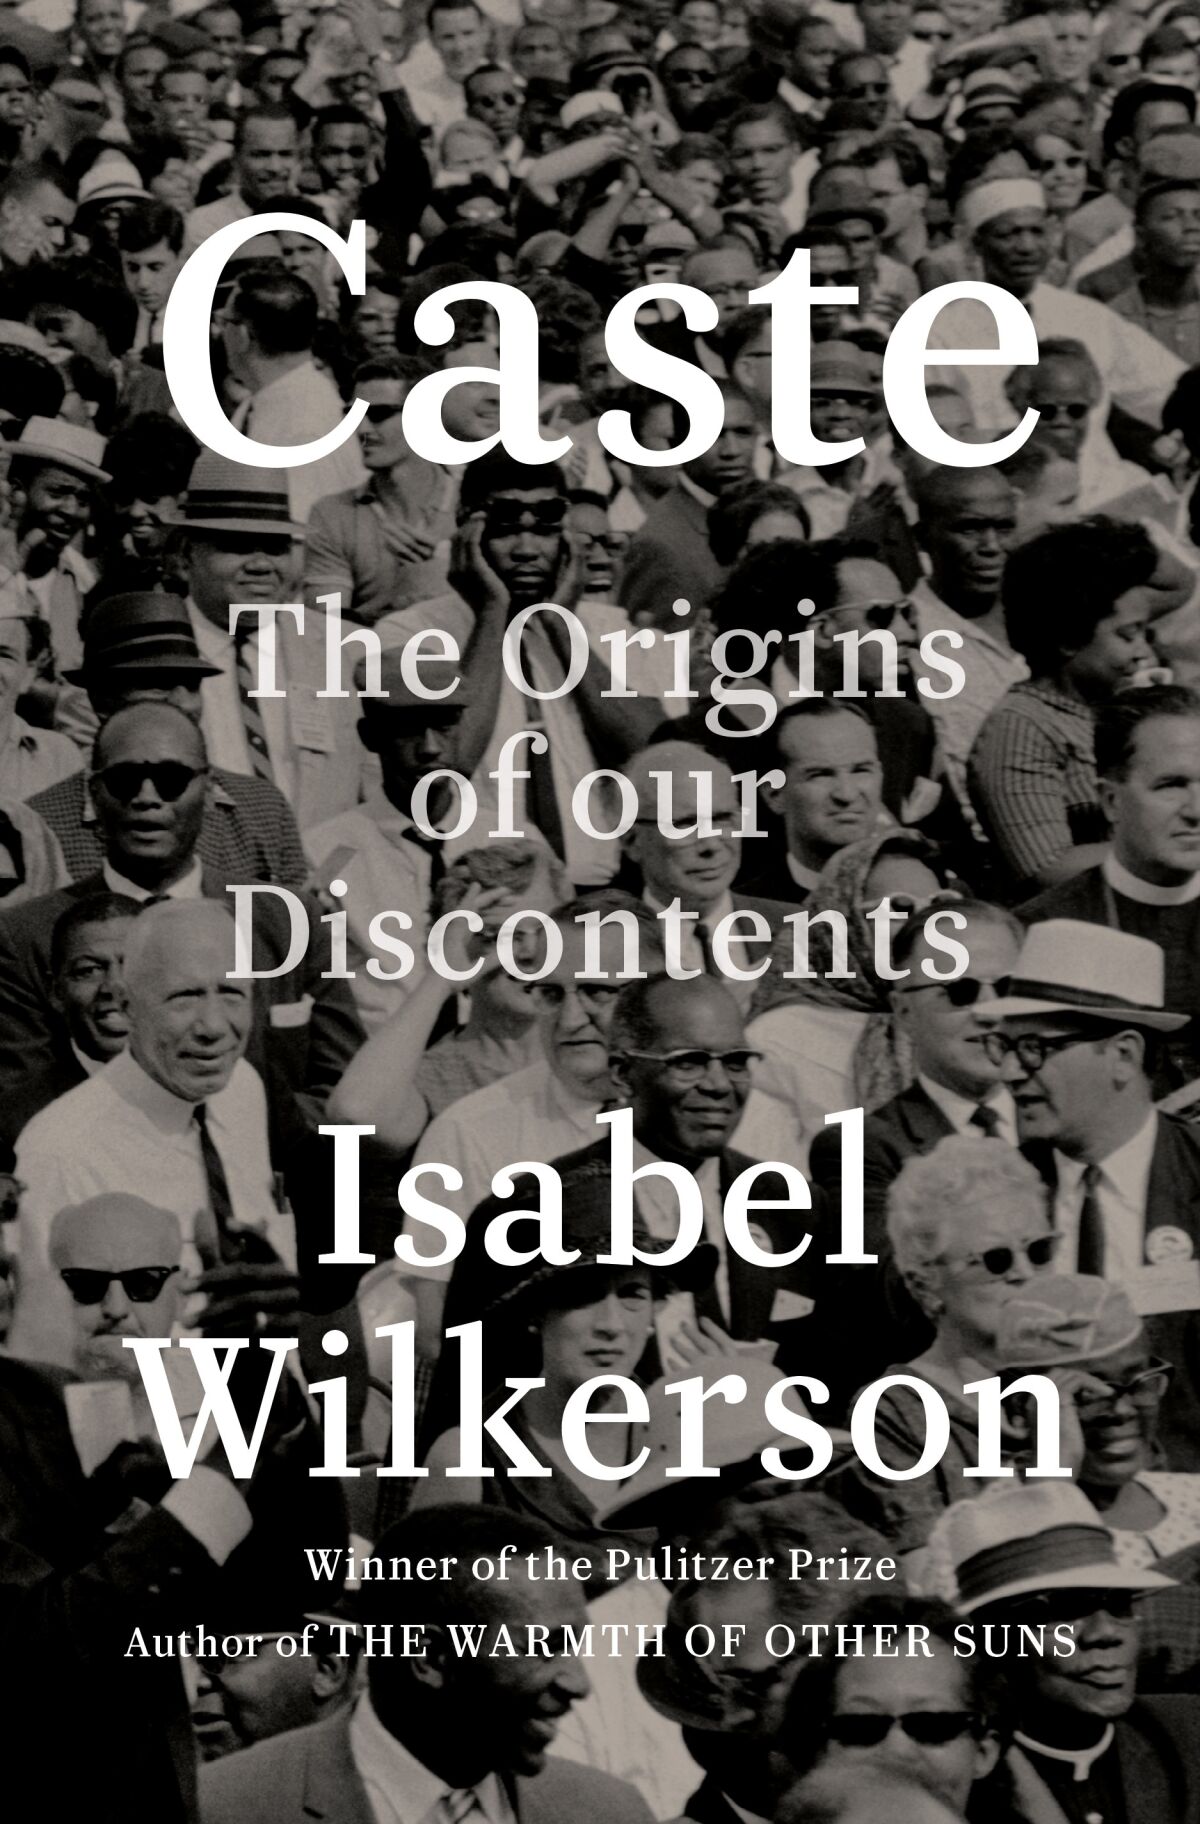  Cover of the book "Caste" by Isabel Wilkerson.